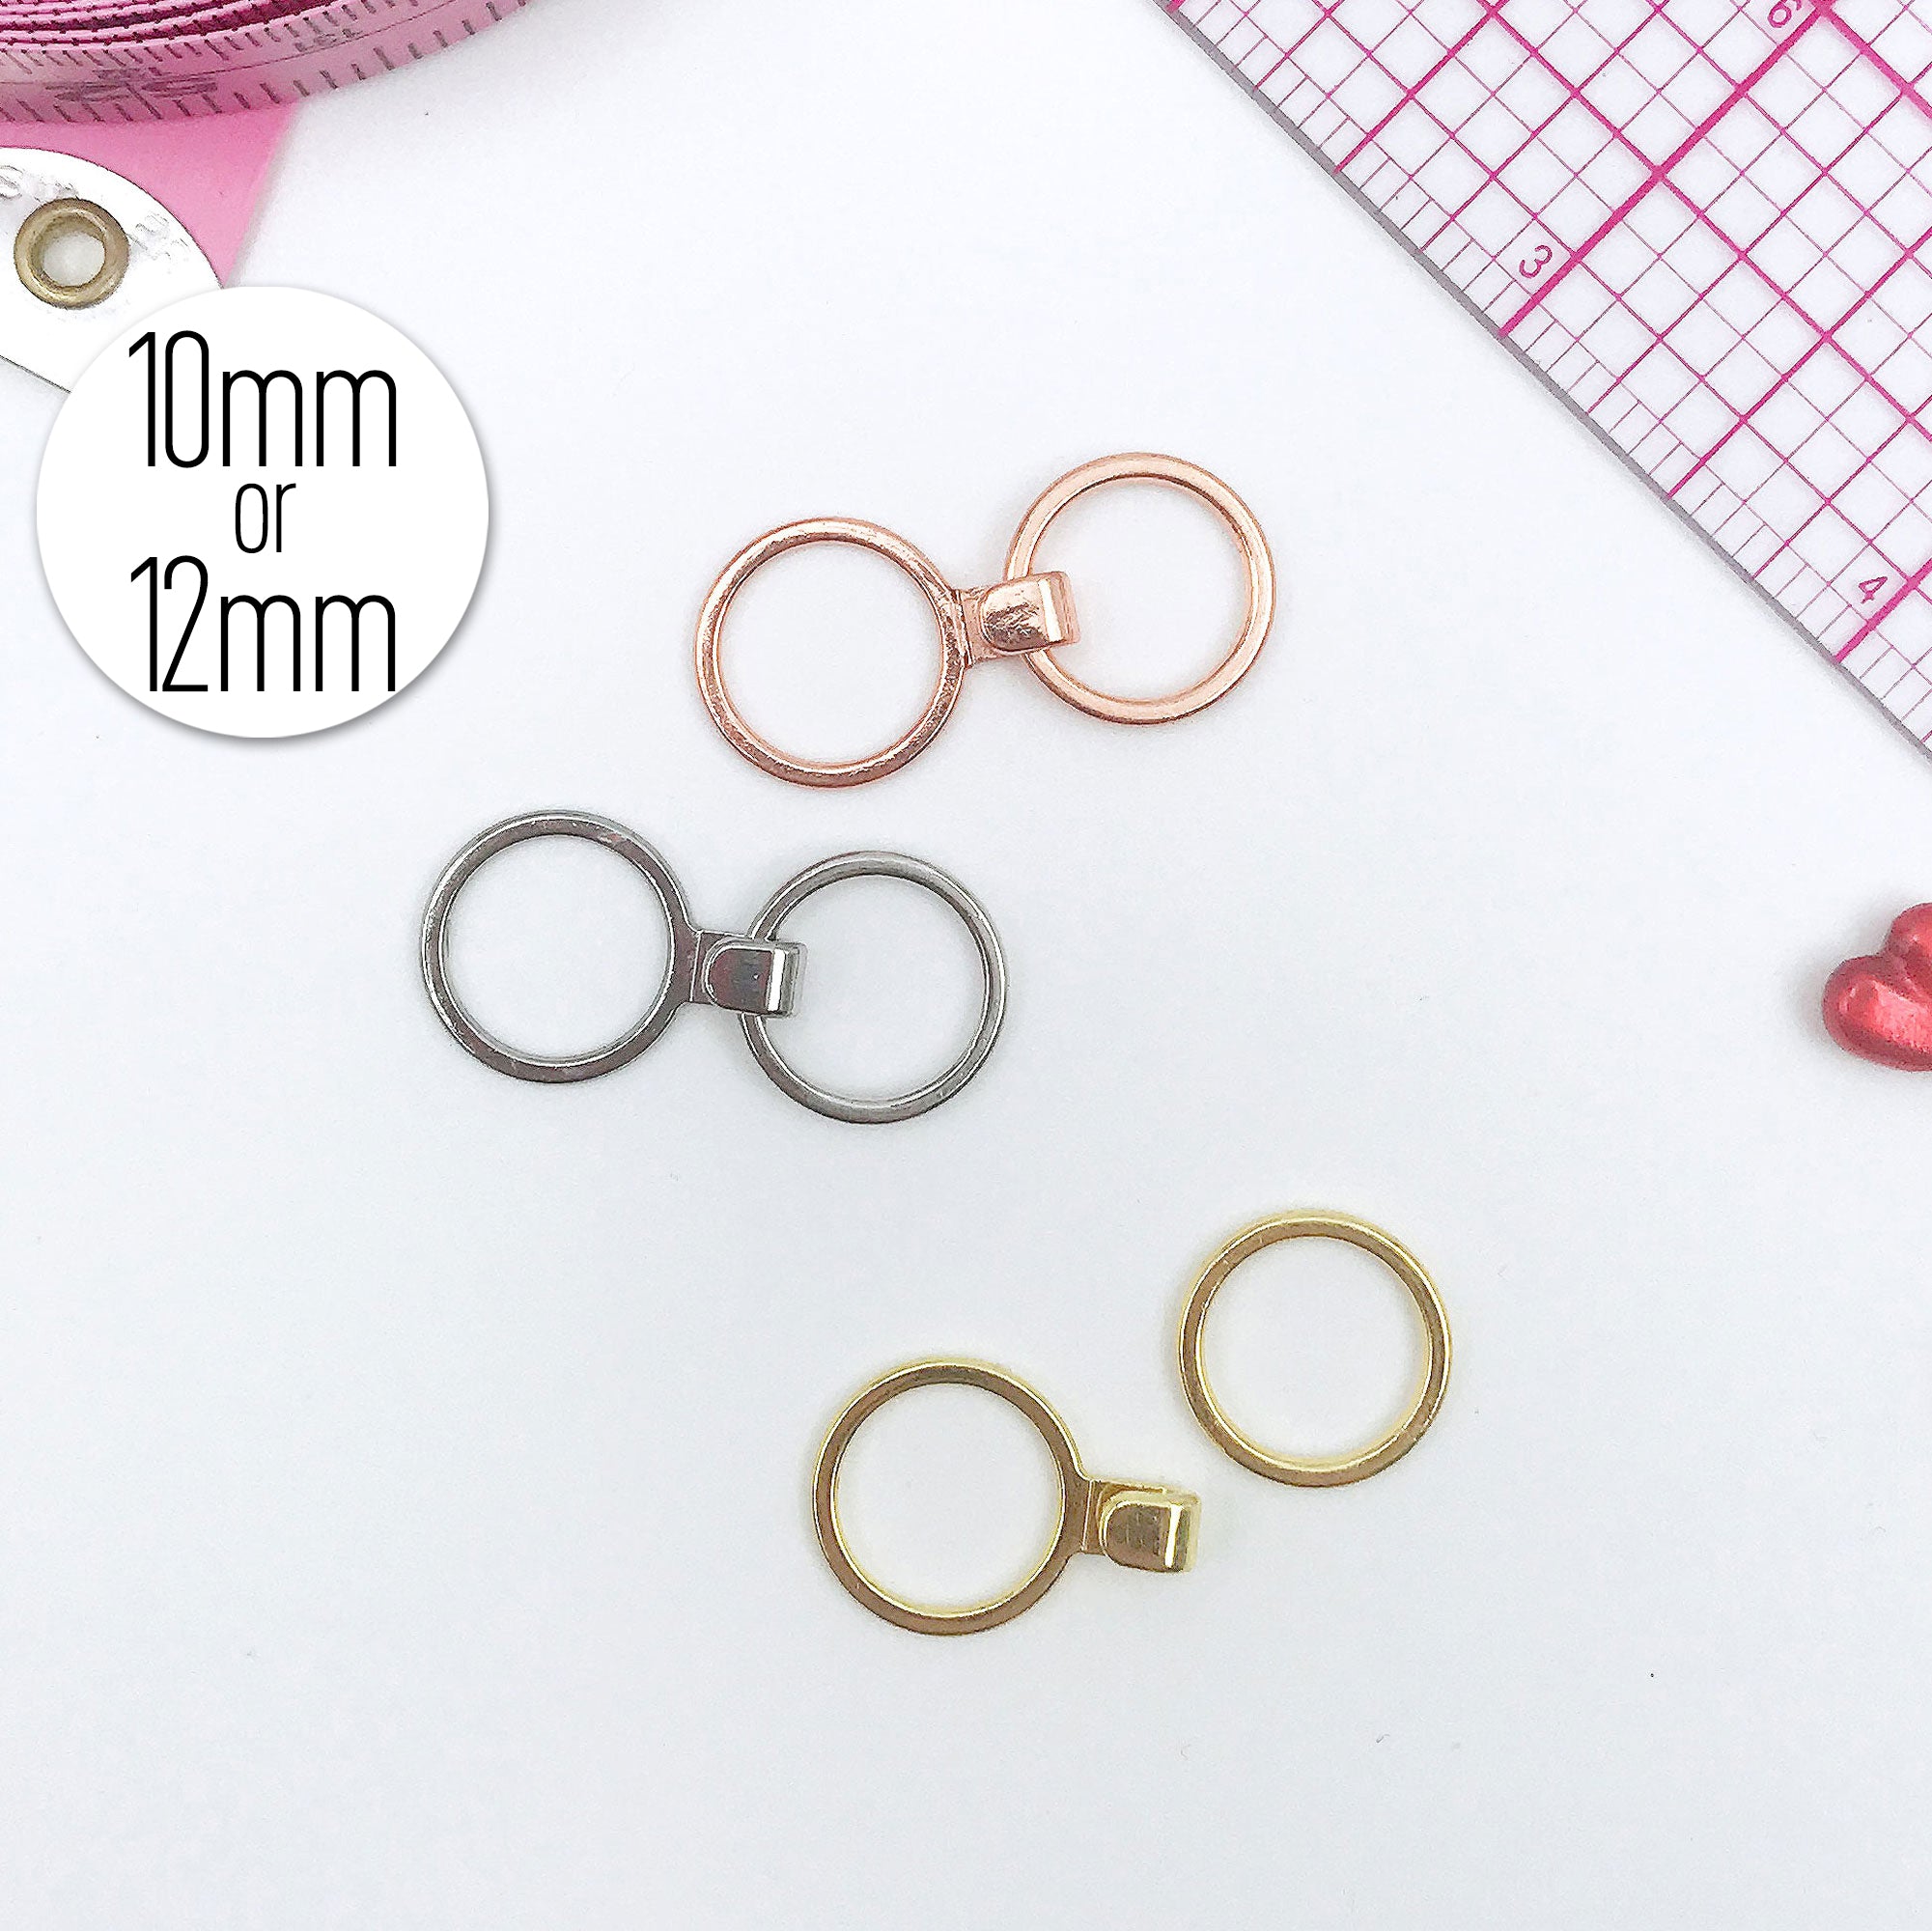 1/2 (12mm) or 3/8 (10mm) J-Hook with ring Set, Converts Bra into